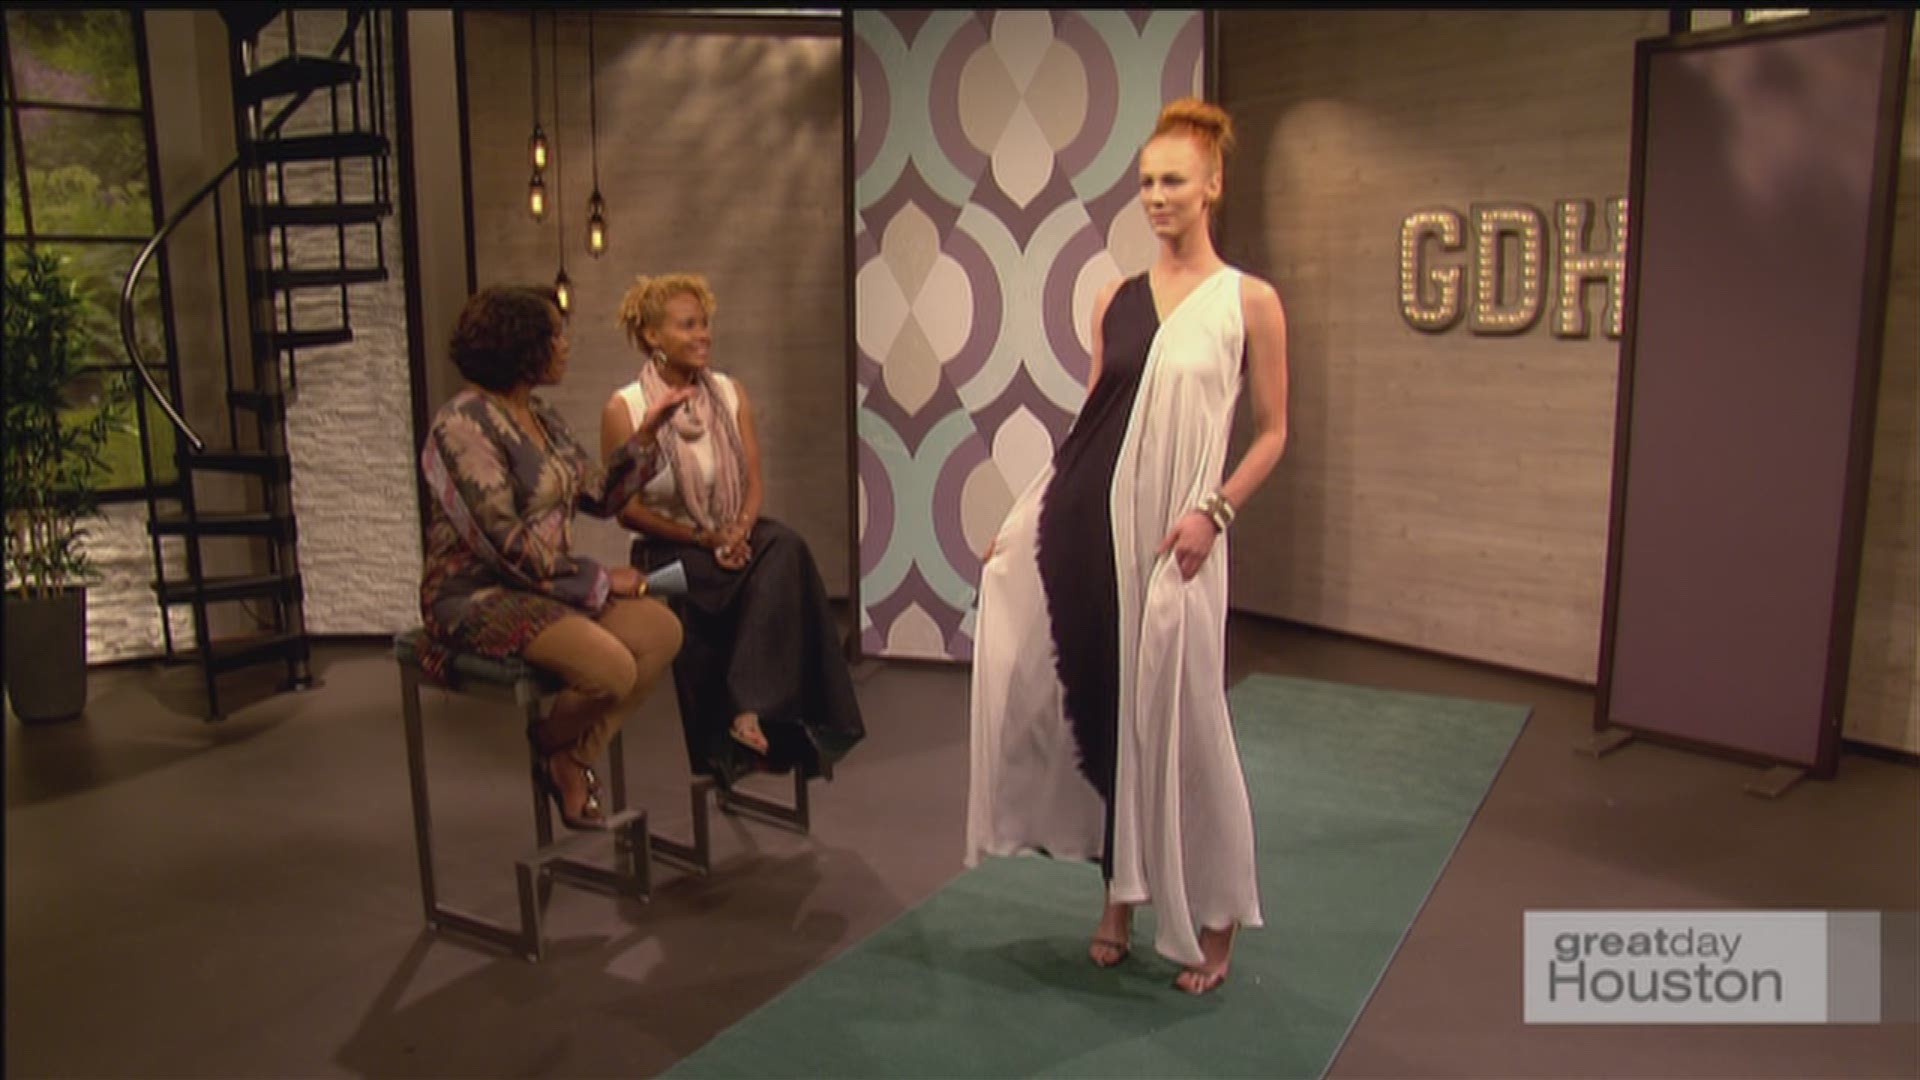 From bohemian chic to couture, Houston fashion designer Deanna Laster debuts her new apparel line, The DEANNAMICHEL Collection on Great Day Houston. 
